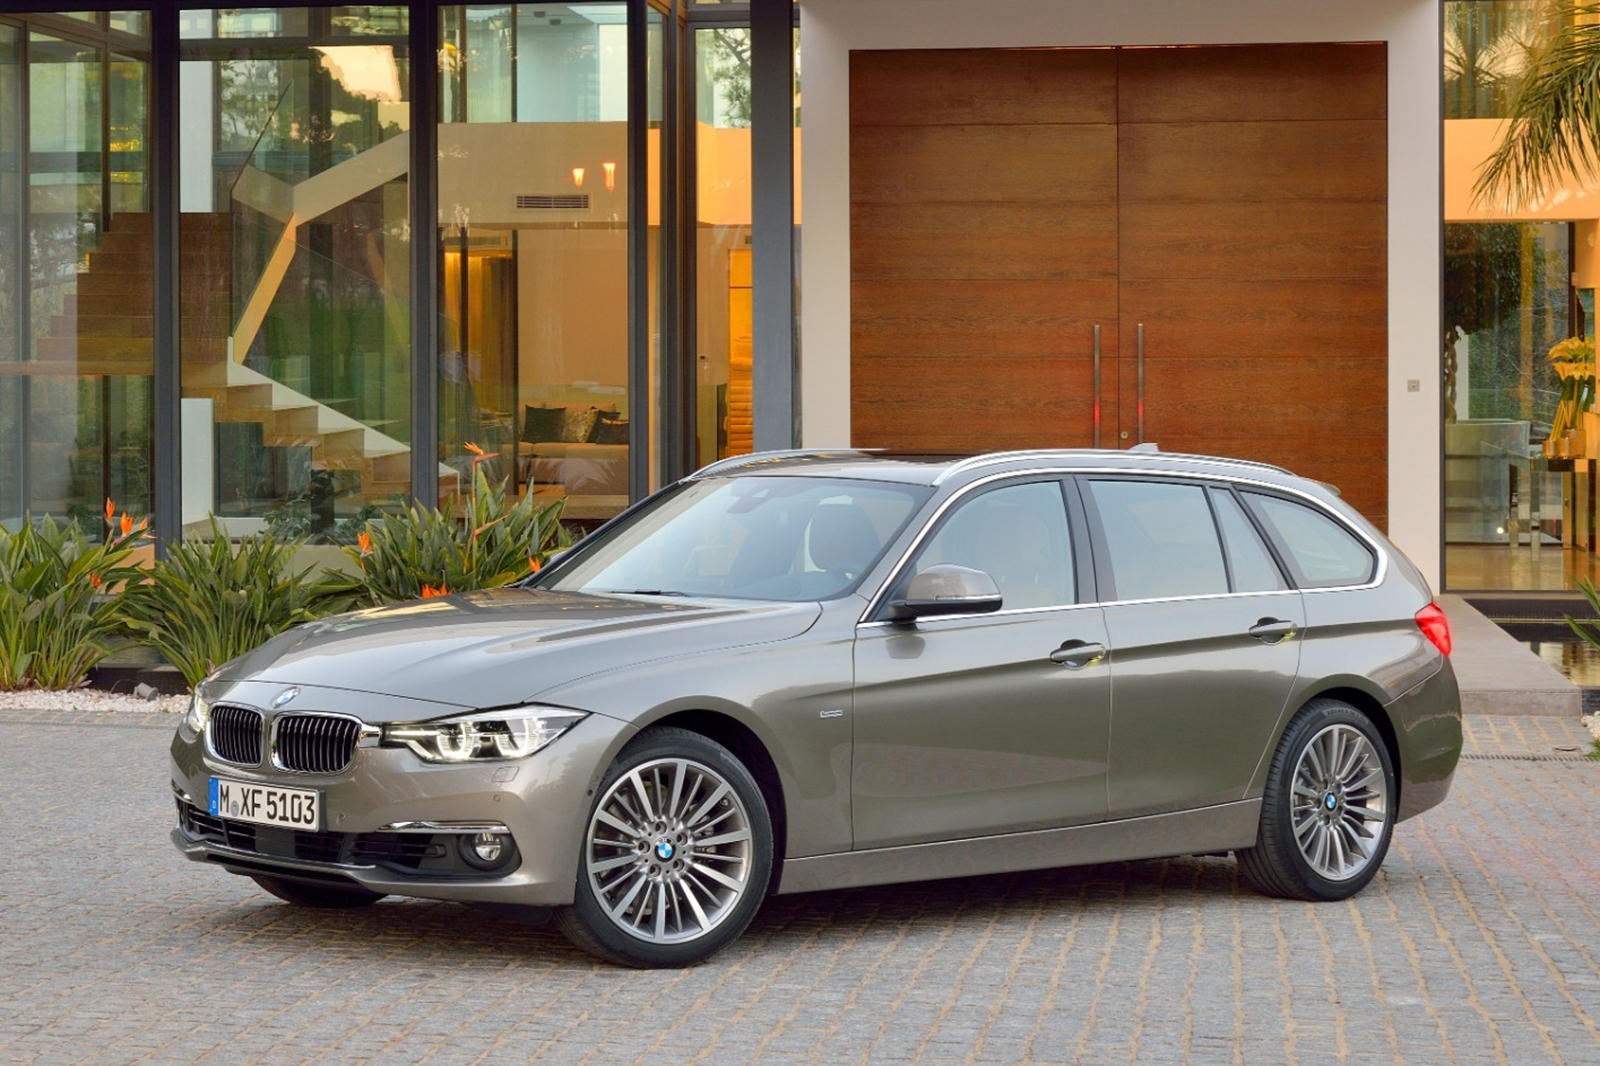 2018 BMW 3 Series Wagon Front Three-Quarter Left Side View